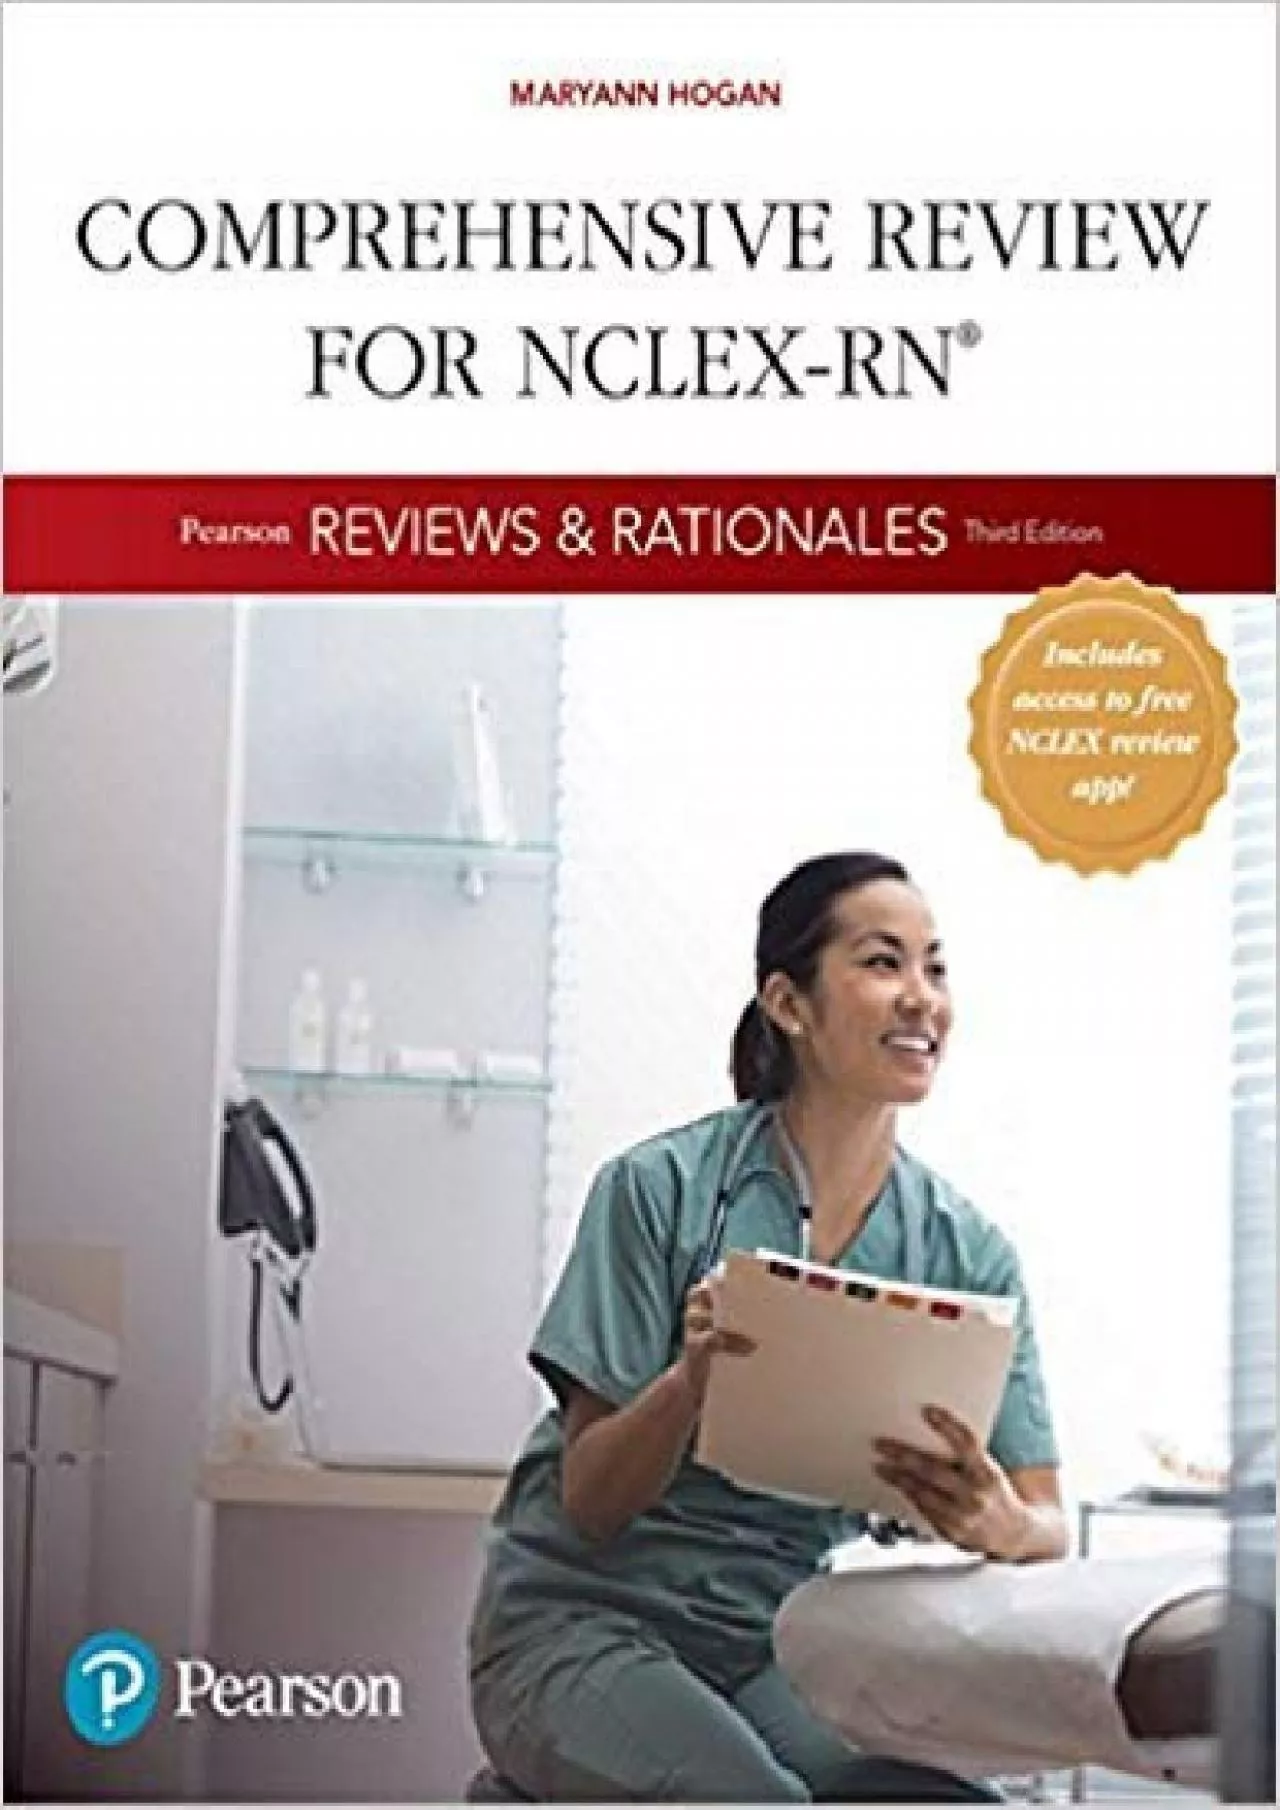 [EBOOK] Pearson Reviews  Rationales: Comprehensive Review for NCLEX-RN Hogan, Pearson